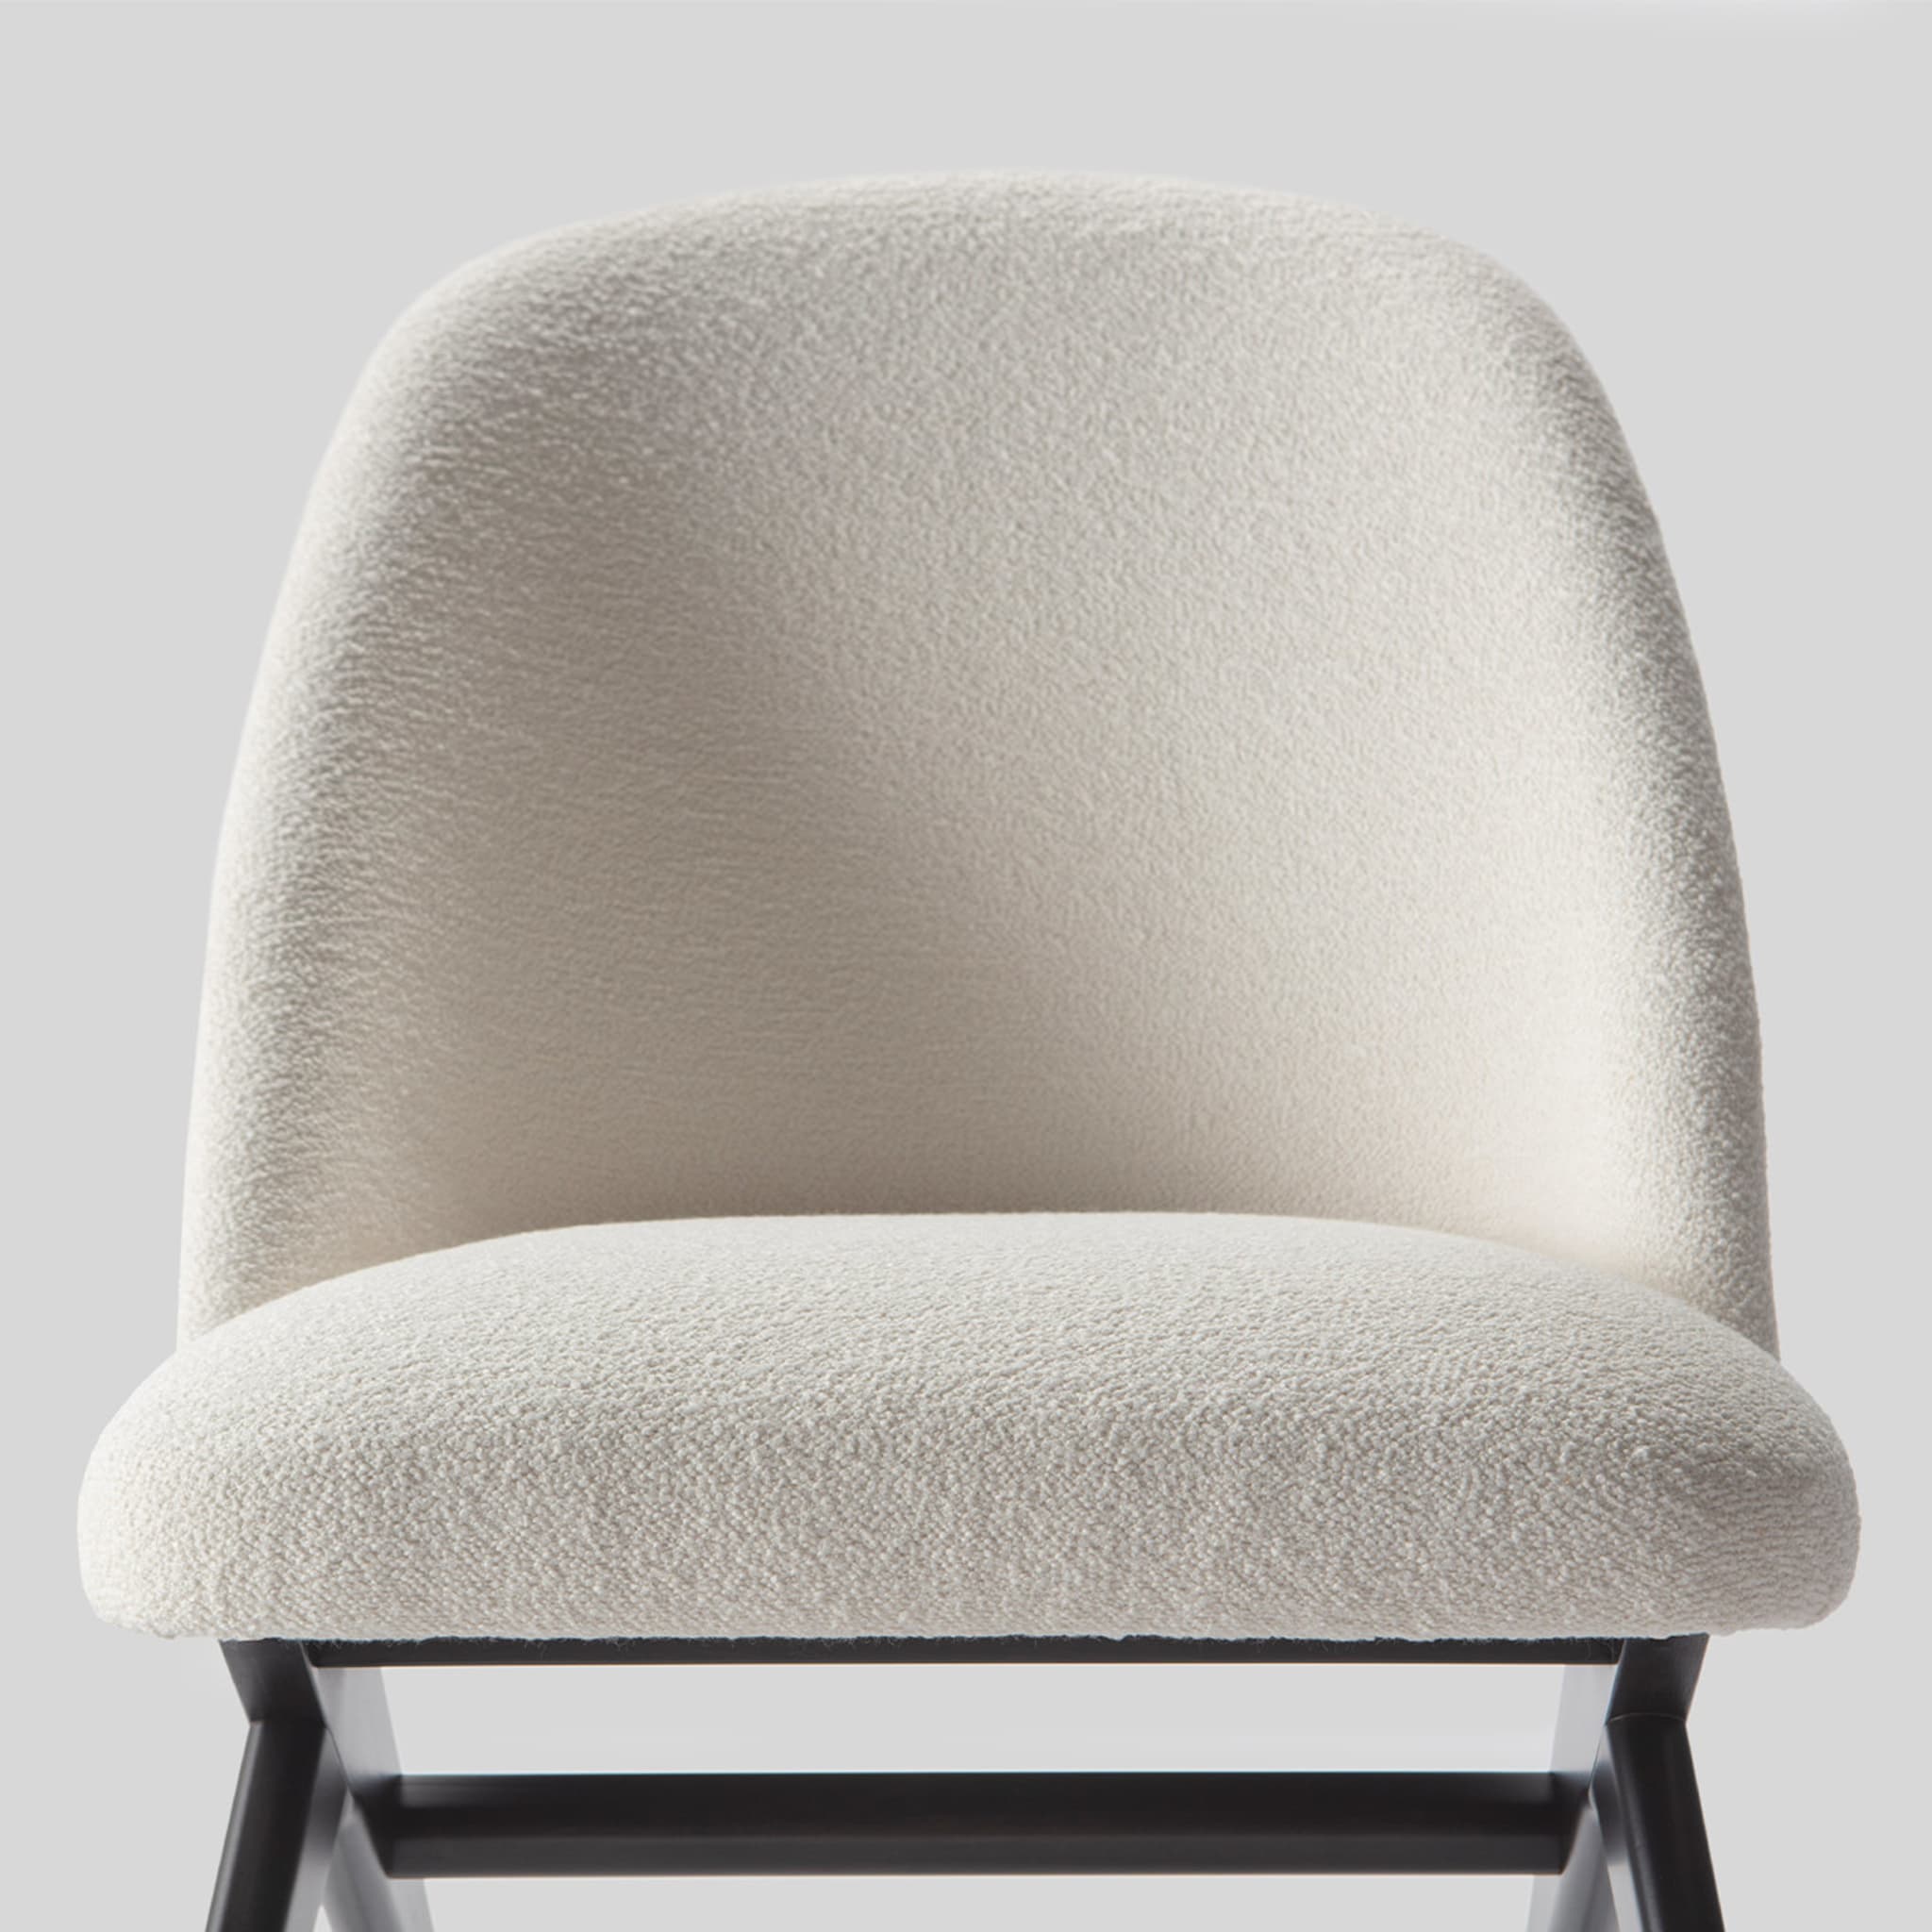 Macao White High Lounge Chair - Alternative view 3